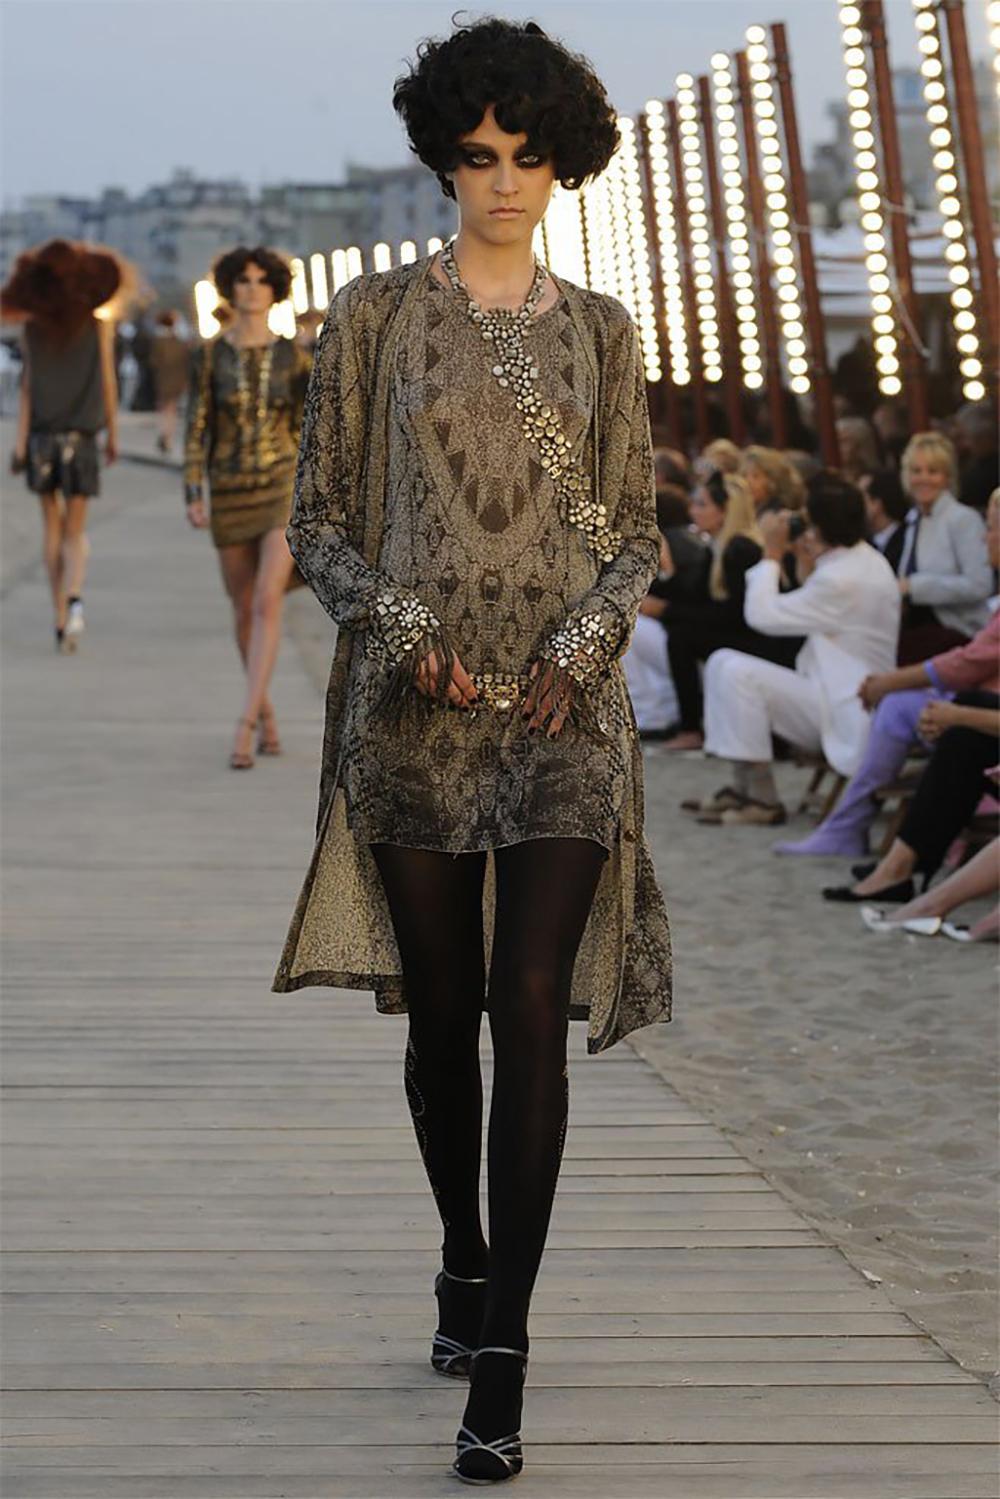 Chanel Paris / Venice Runway Belted Shimmering Dress In Excellent Condition For Sale In Dubai, AE